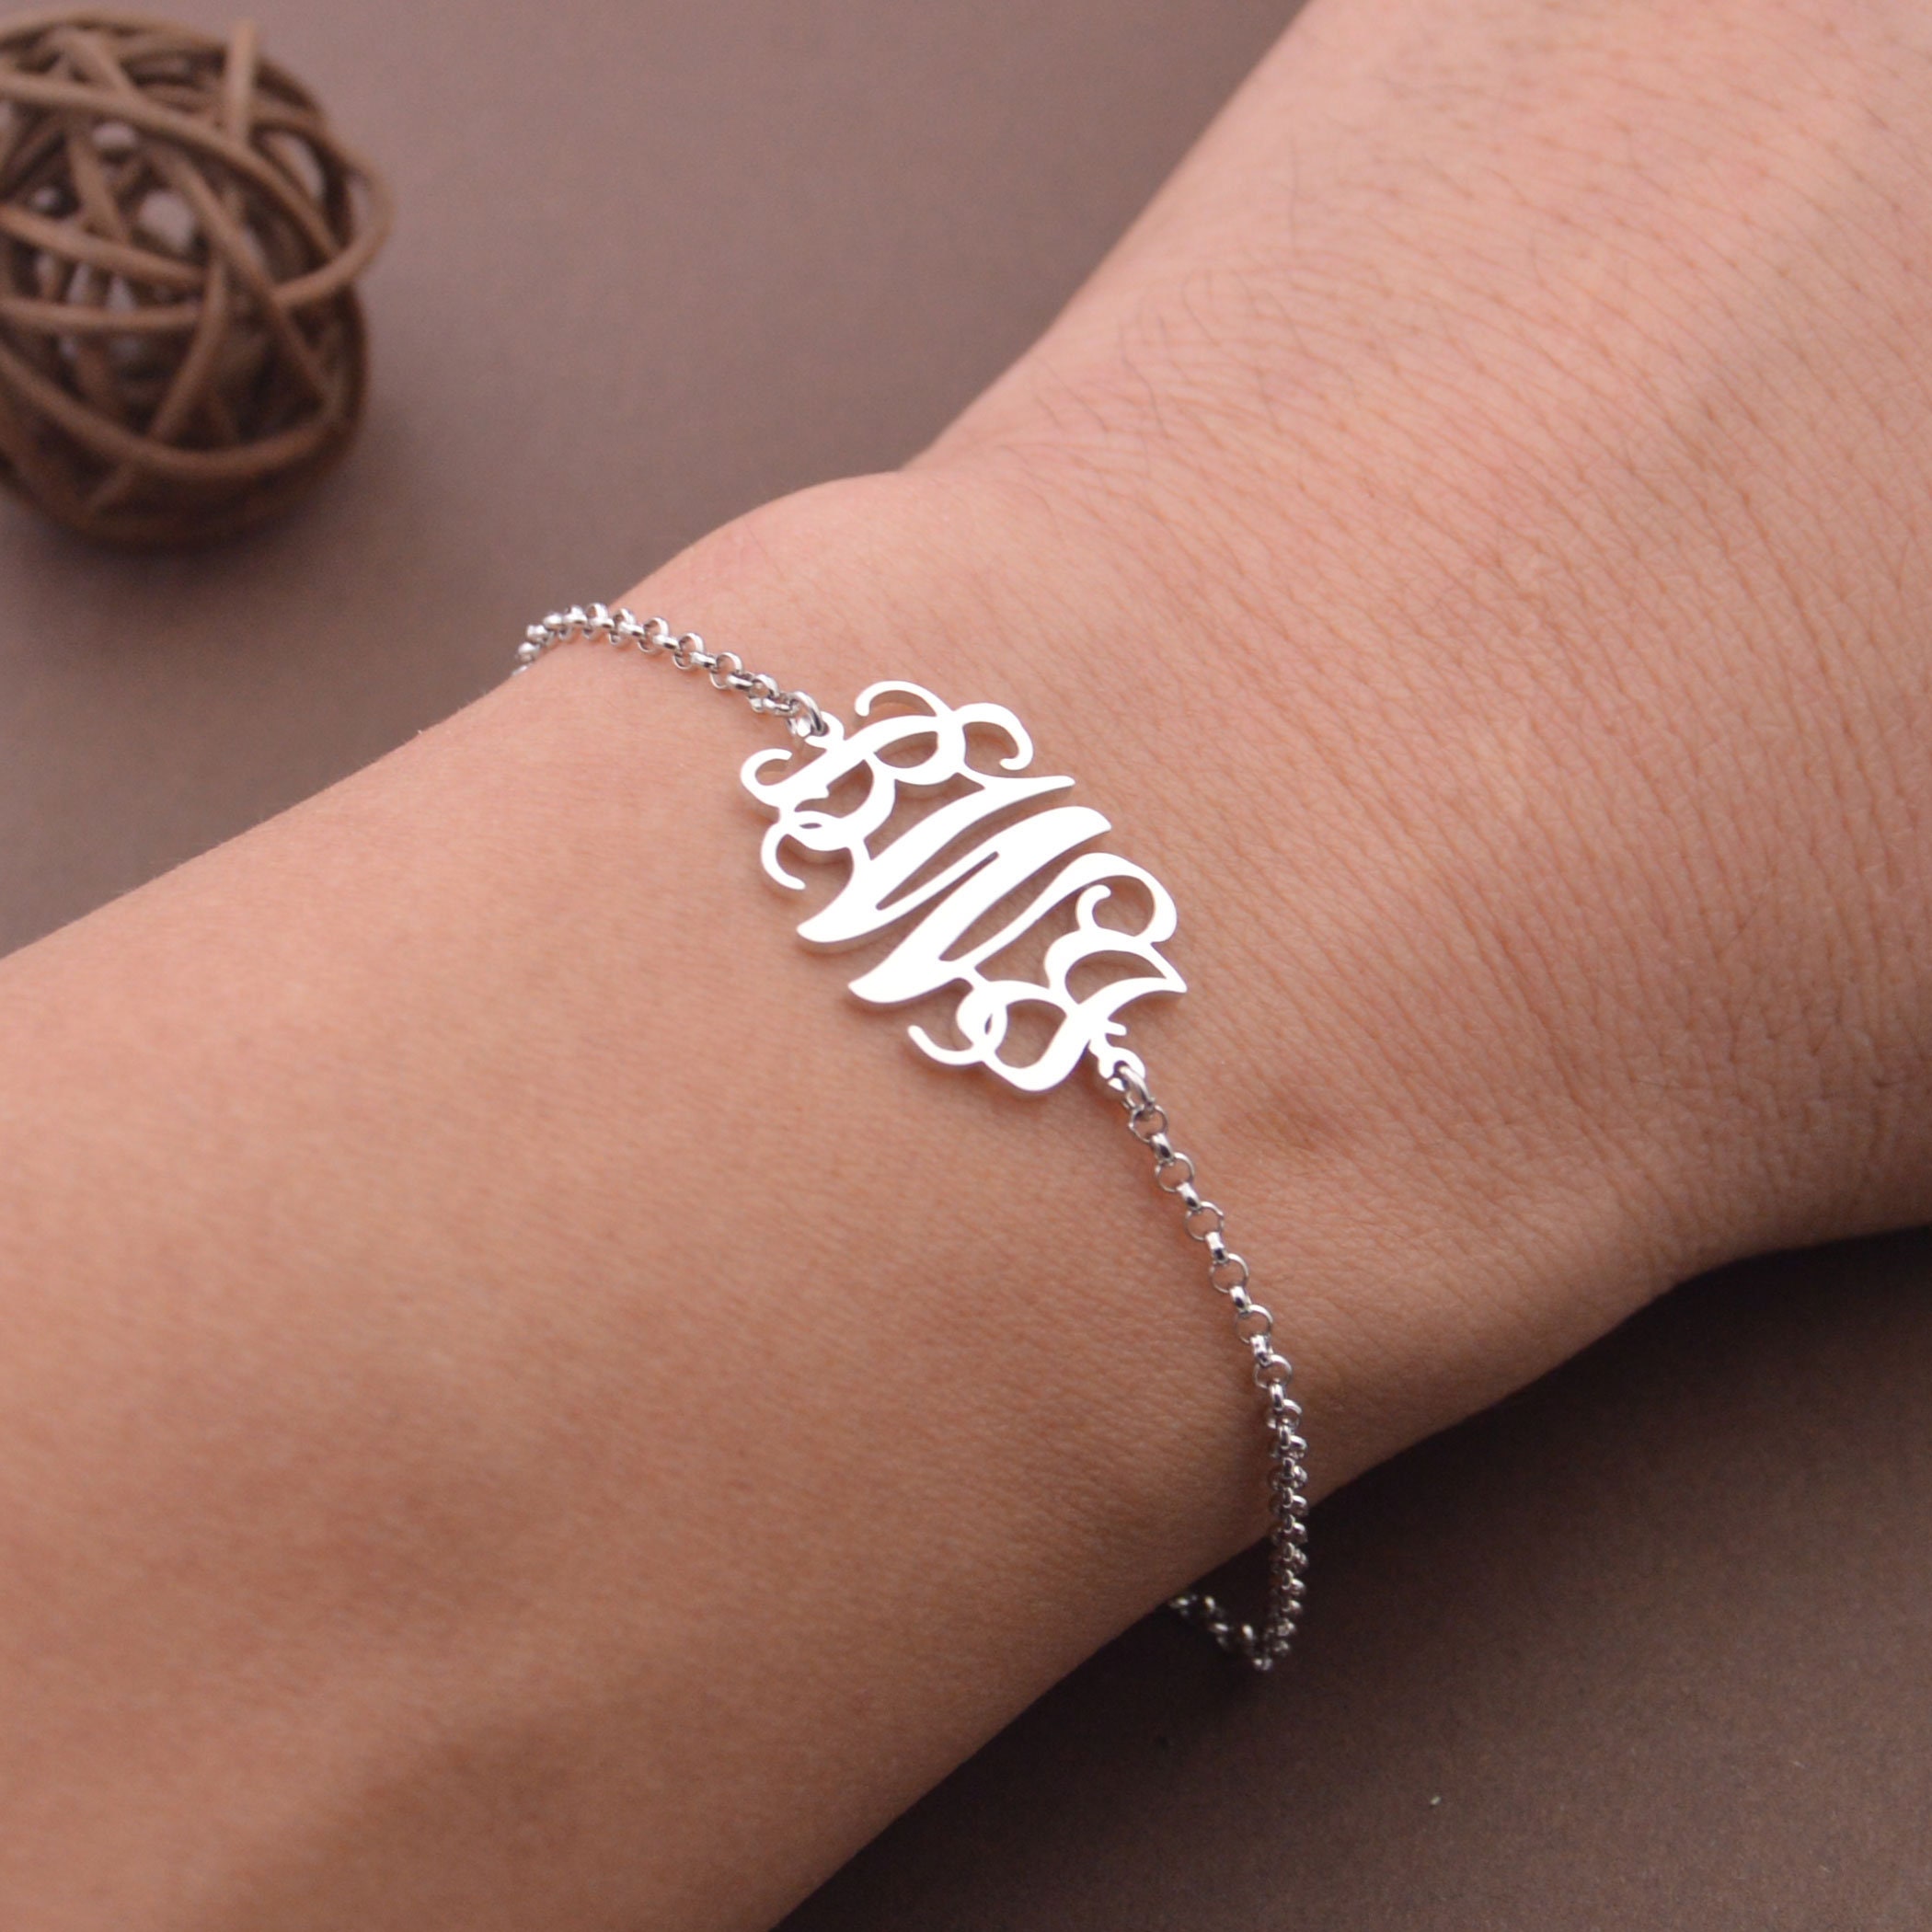 Monogram Bracelet Sterling Silver with or Without Gold Plate Center